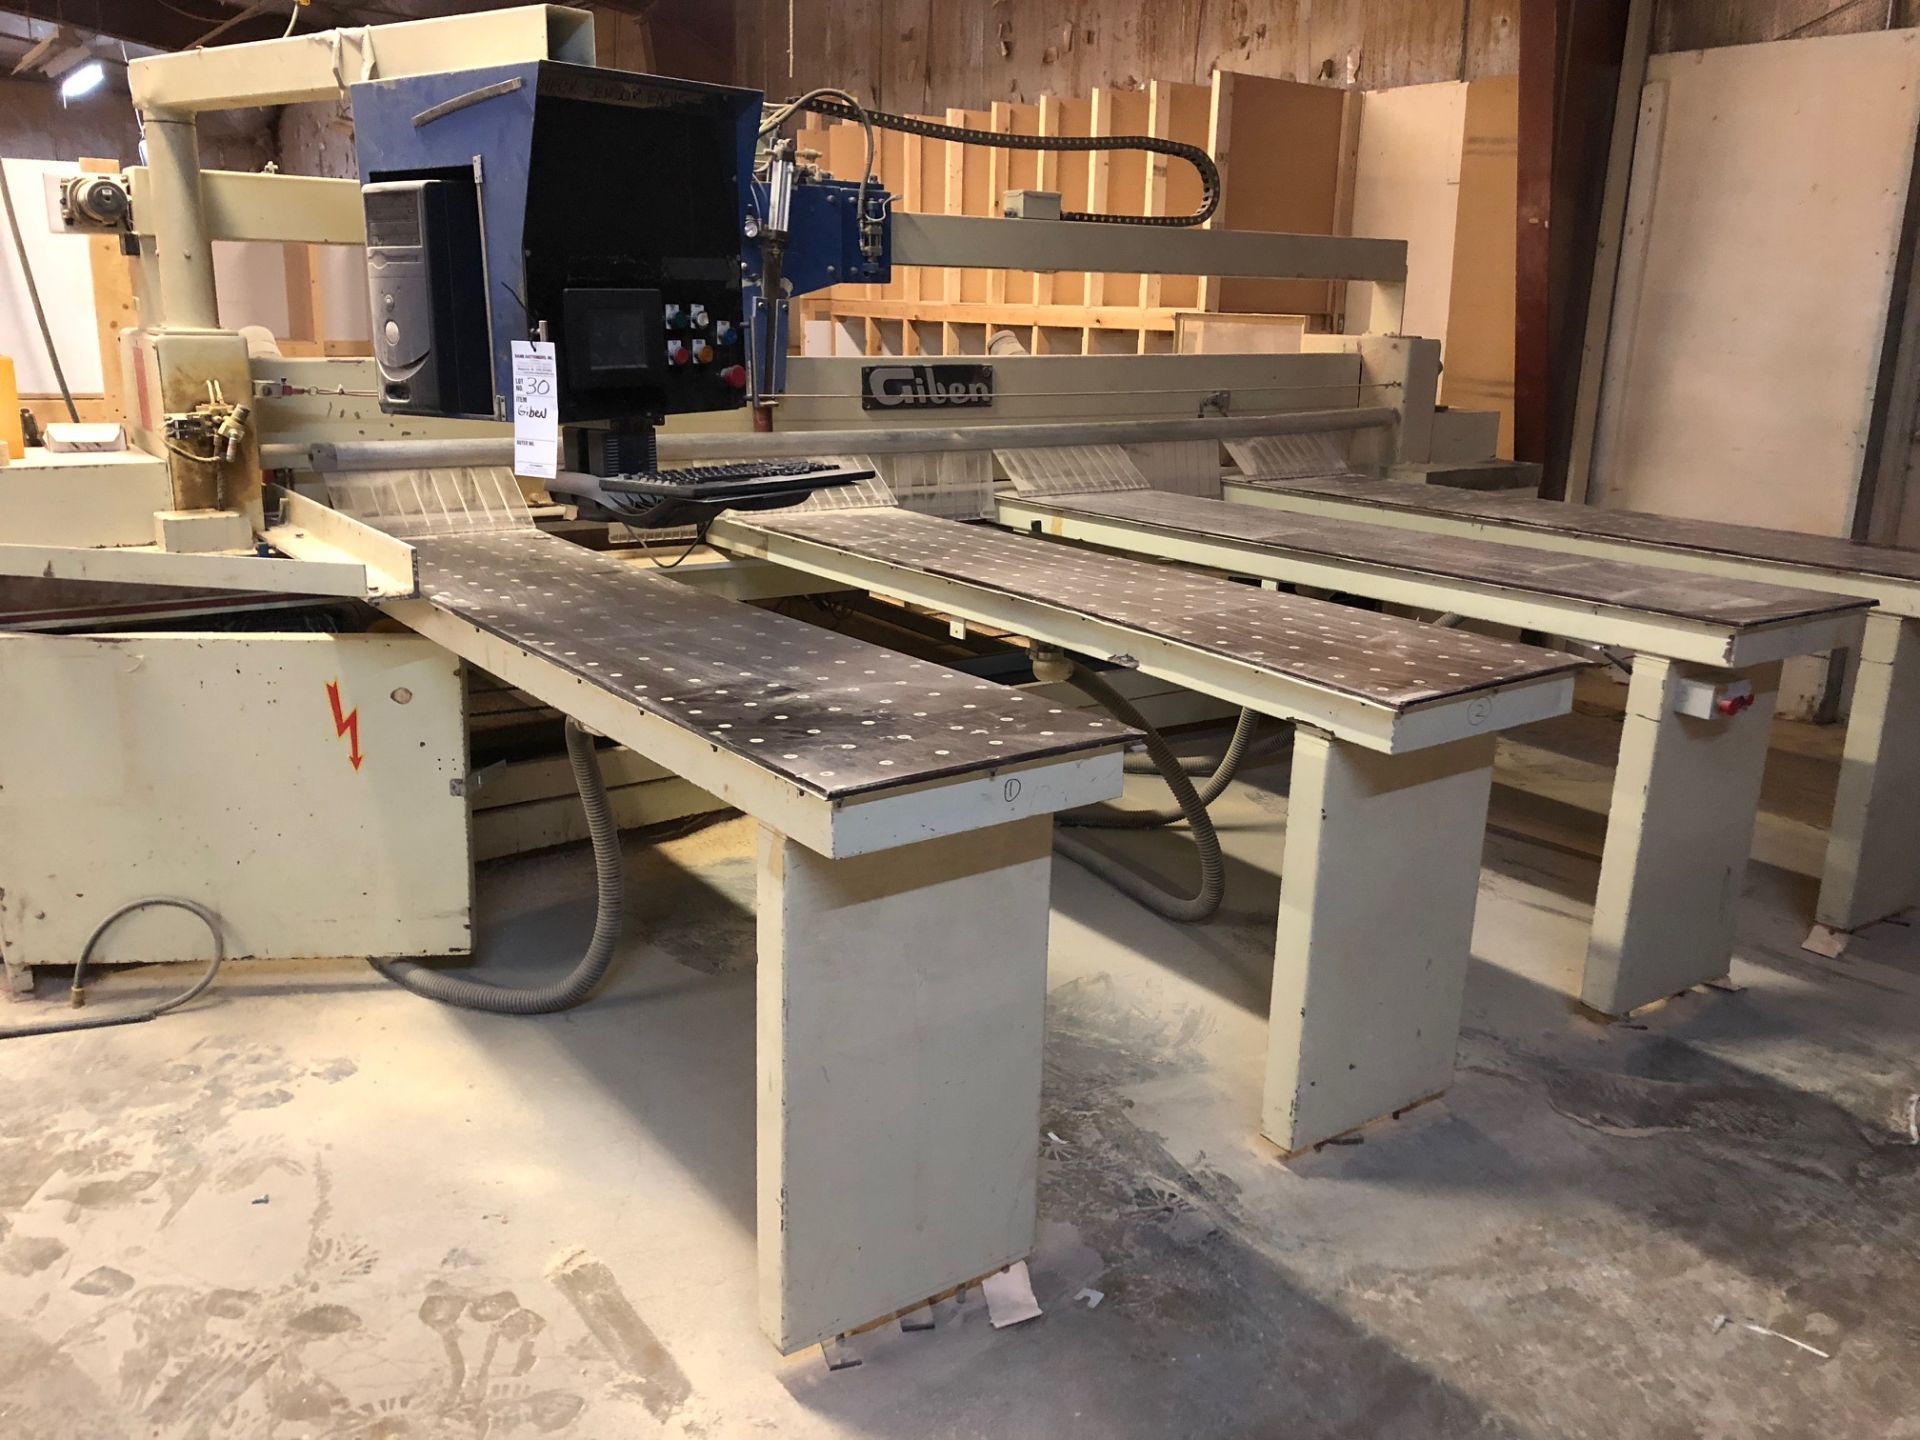 Giben prismatic type panel cutting beam saw, tail and feeder tables